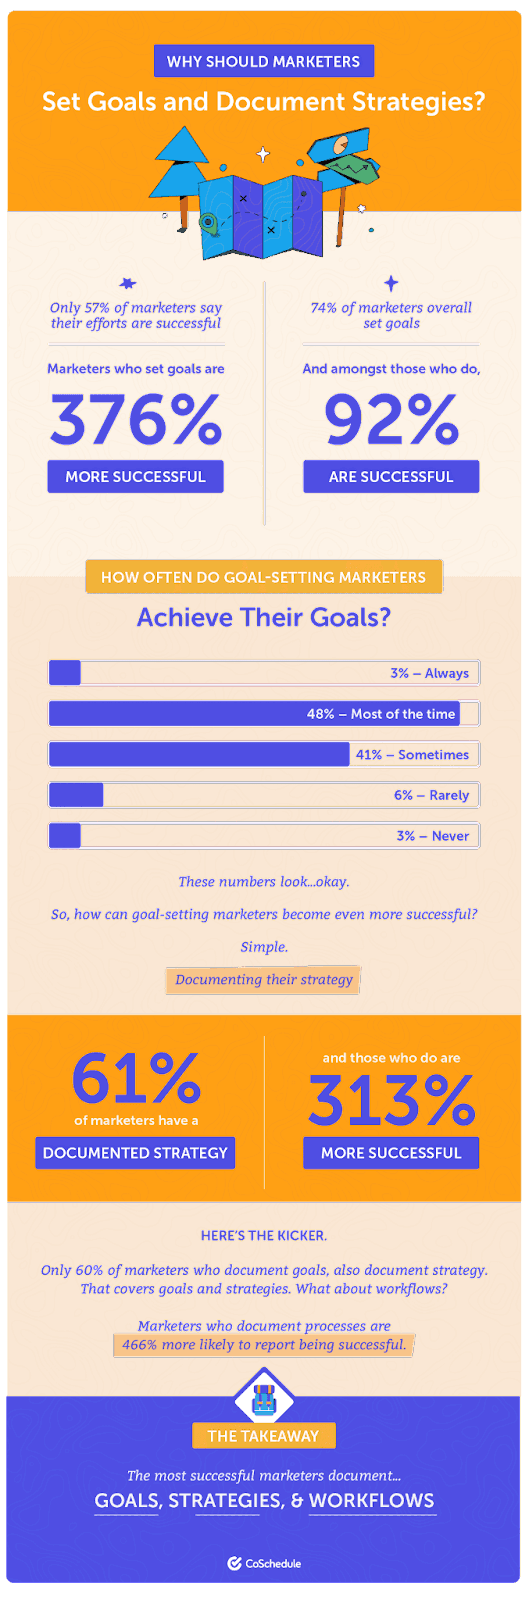 Coschedule goals and document strategies graphic